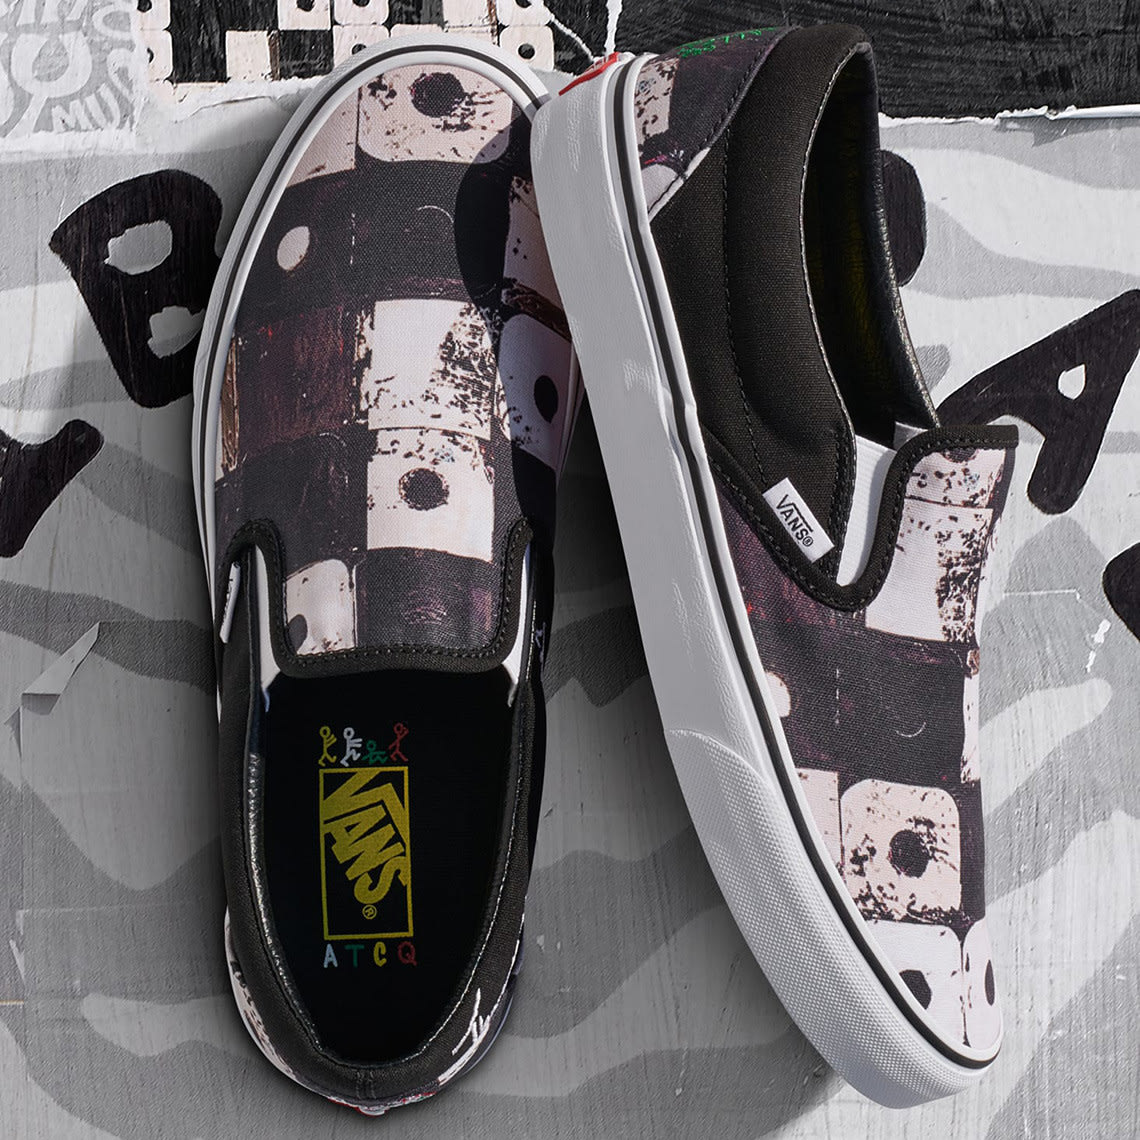 vans-a-tribe-called-quest4